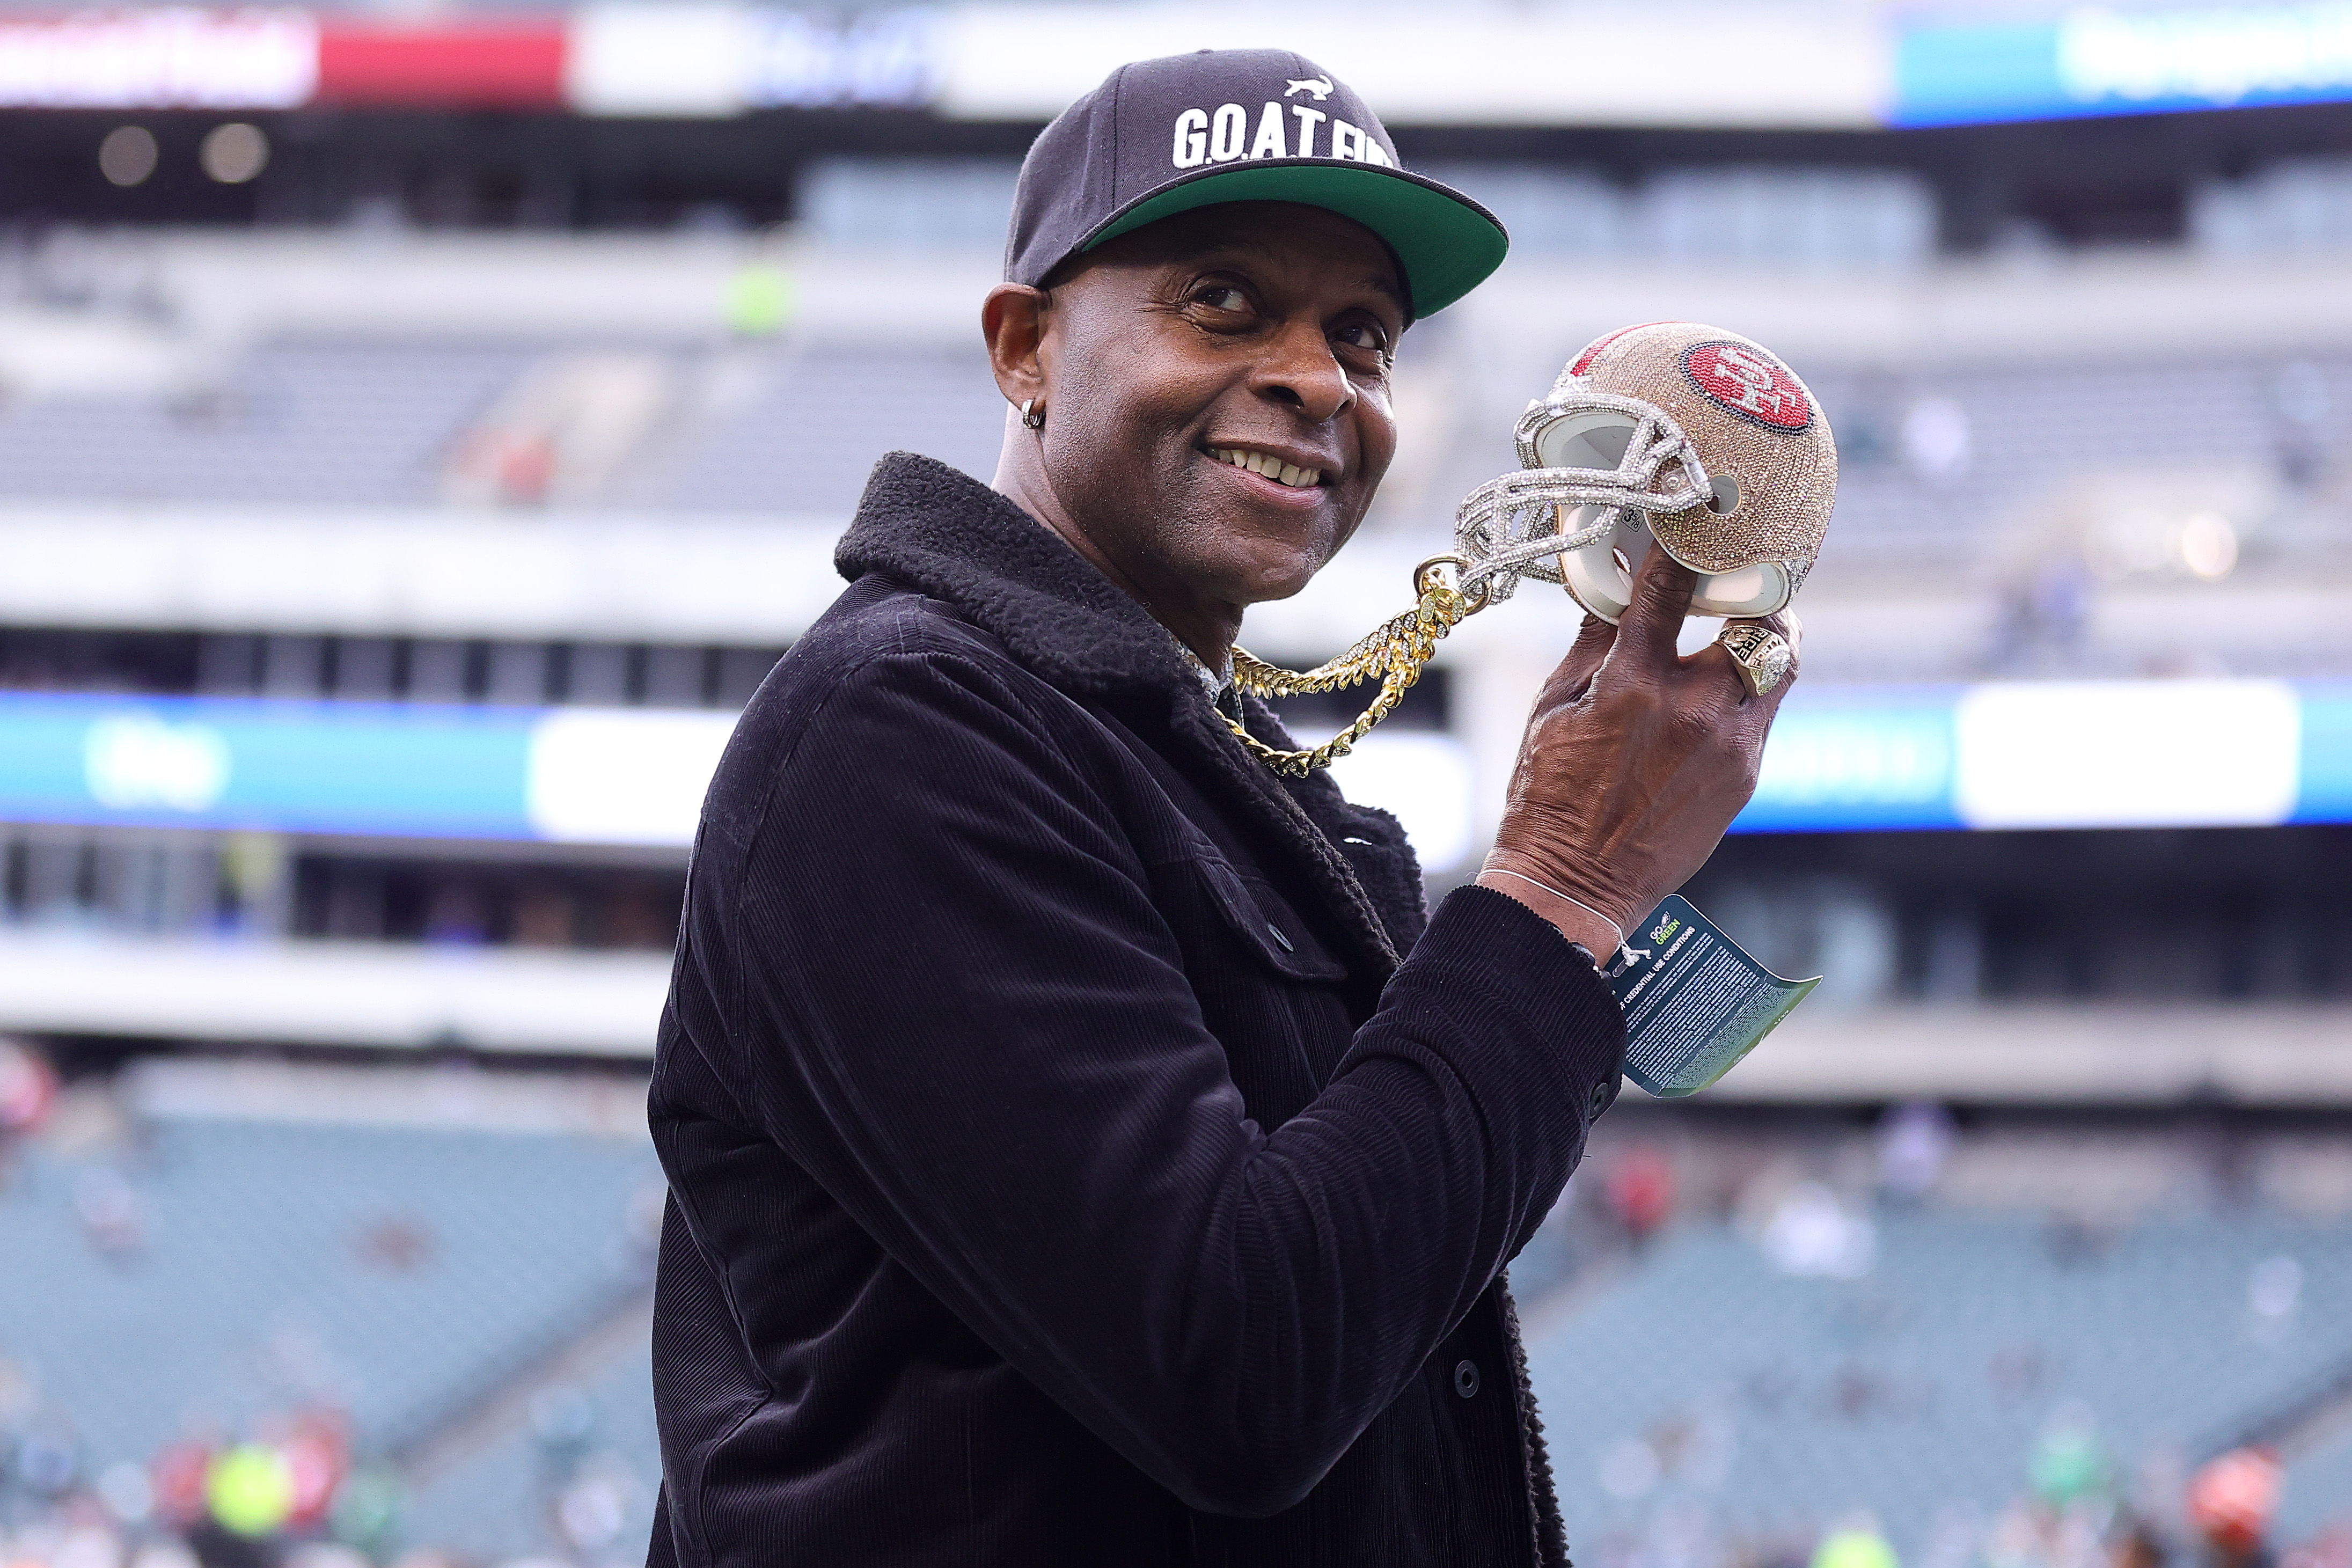 Jerry Rice at Lincoln Financial Field on January 29, 2023, in Philadelphia, Pennsylvania. | Source: Getty Images